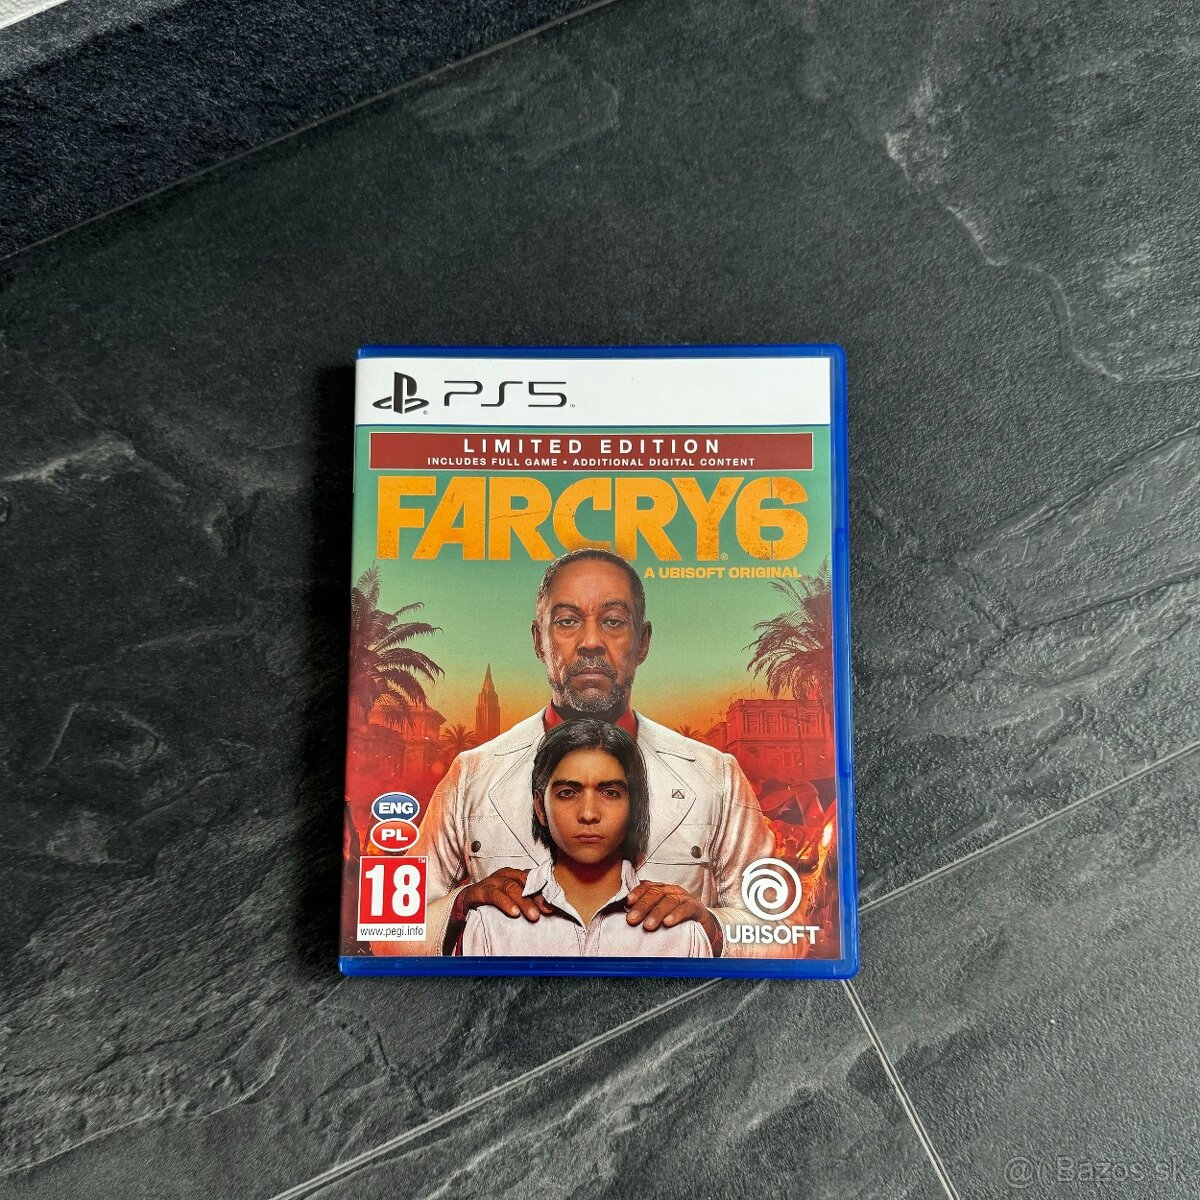 PS5 | FAR CRY 6 LIMITED EDITION